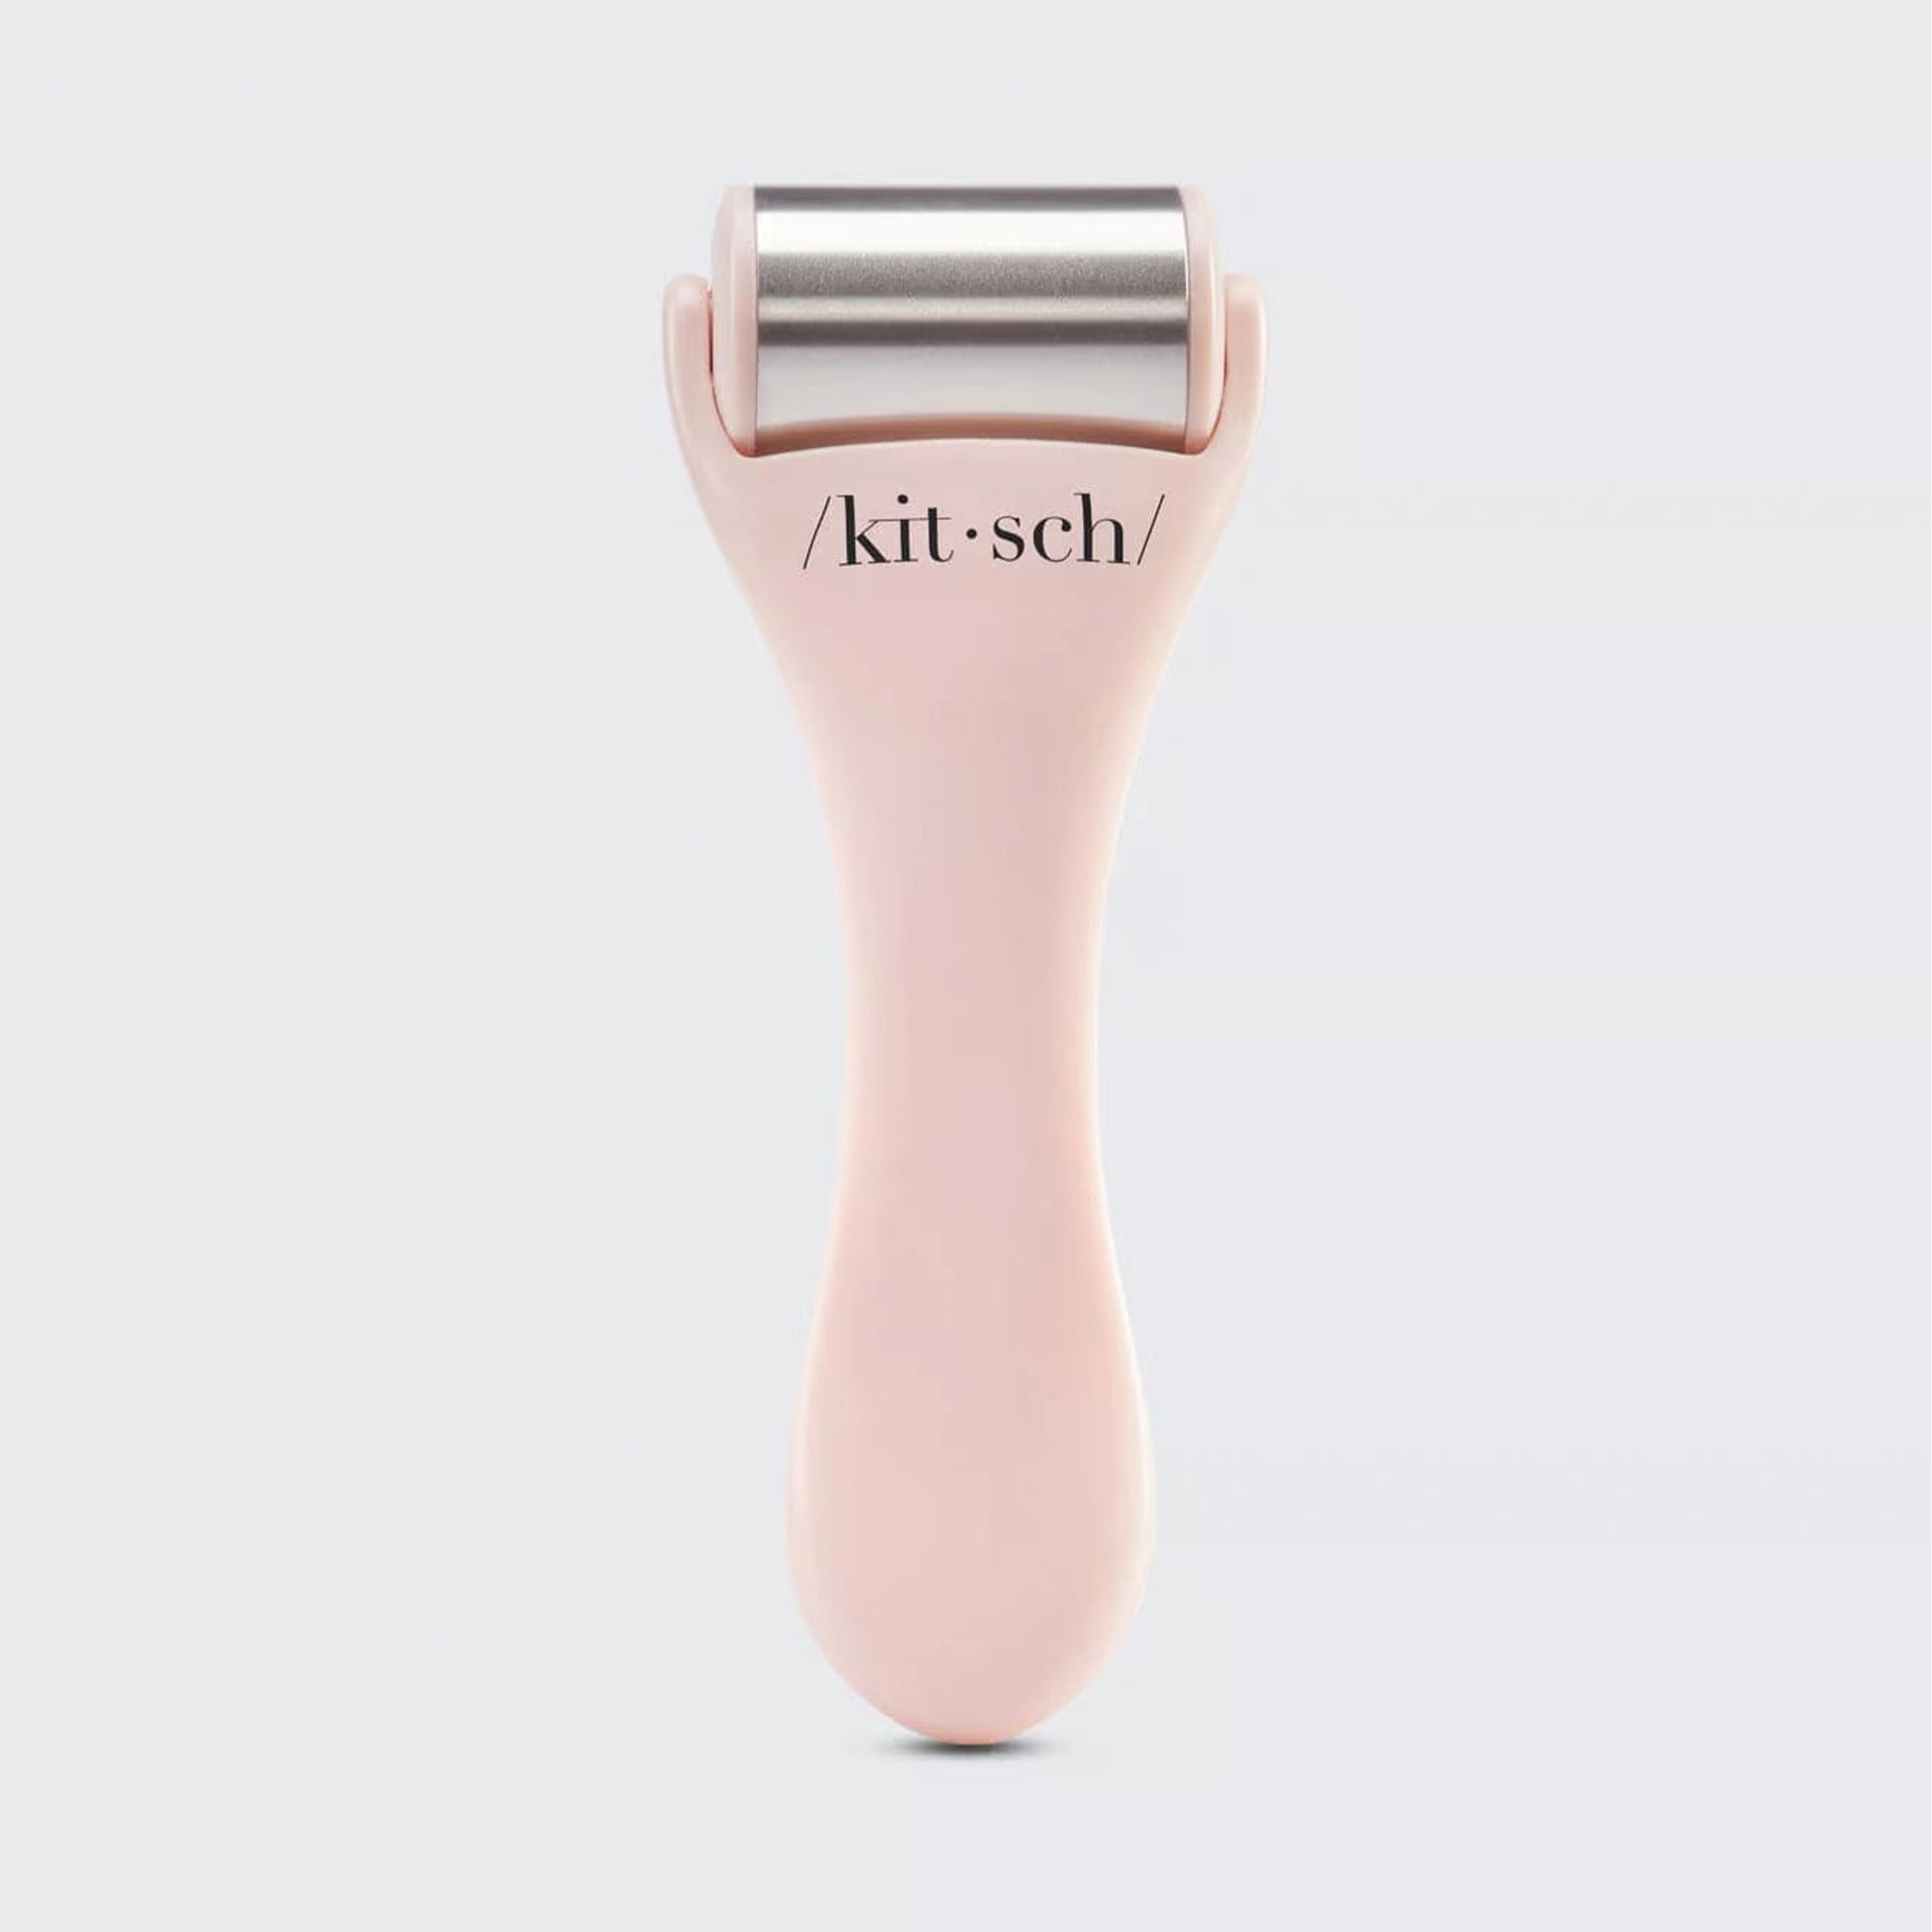 On a white background is a light pink and stainless steel facial ice roller. 